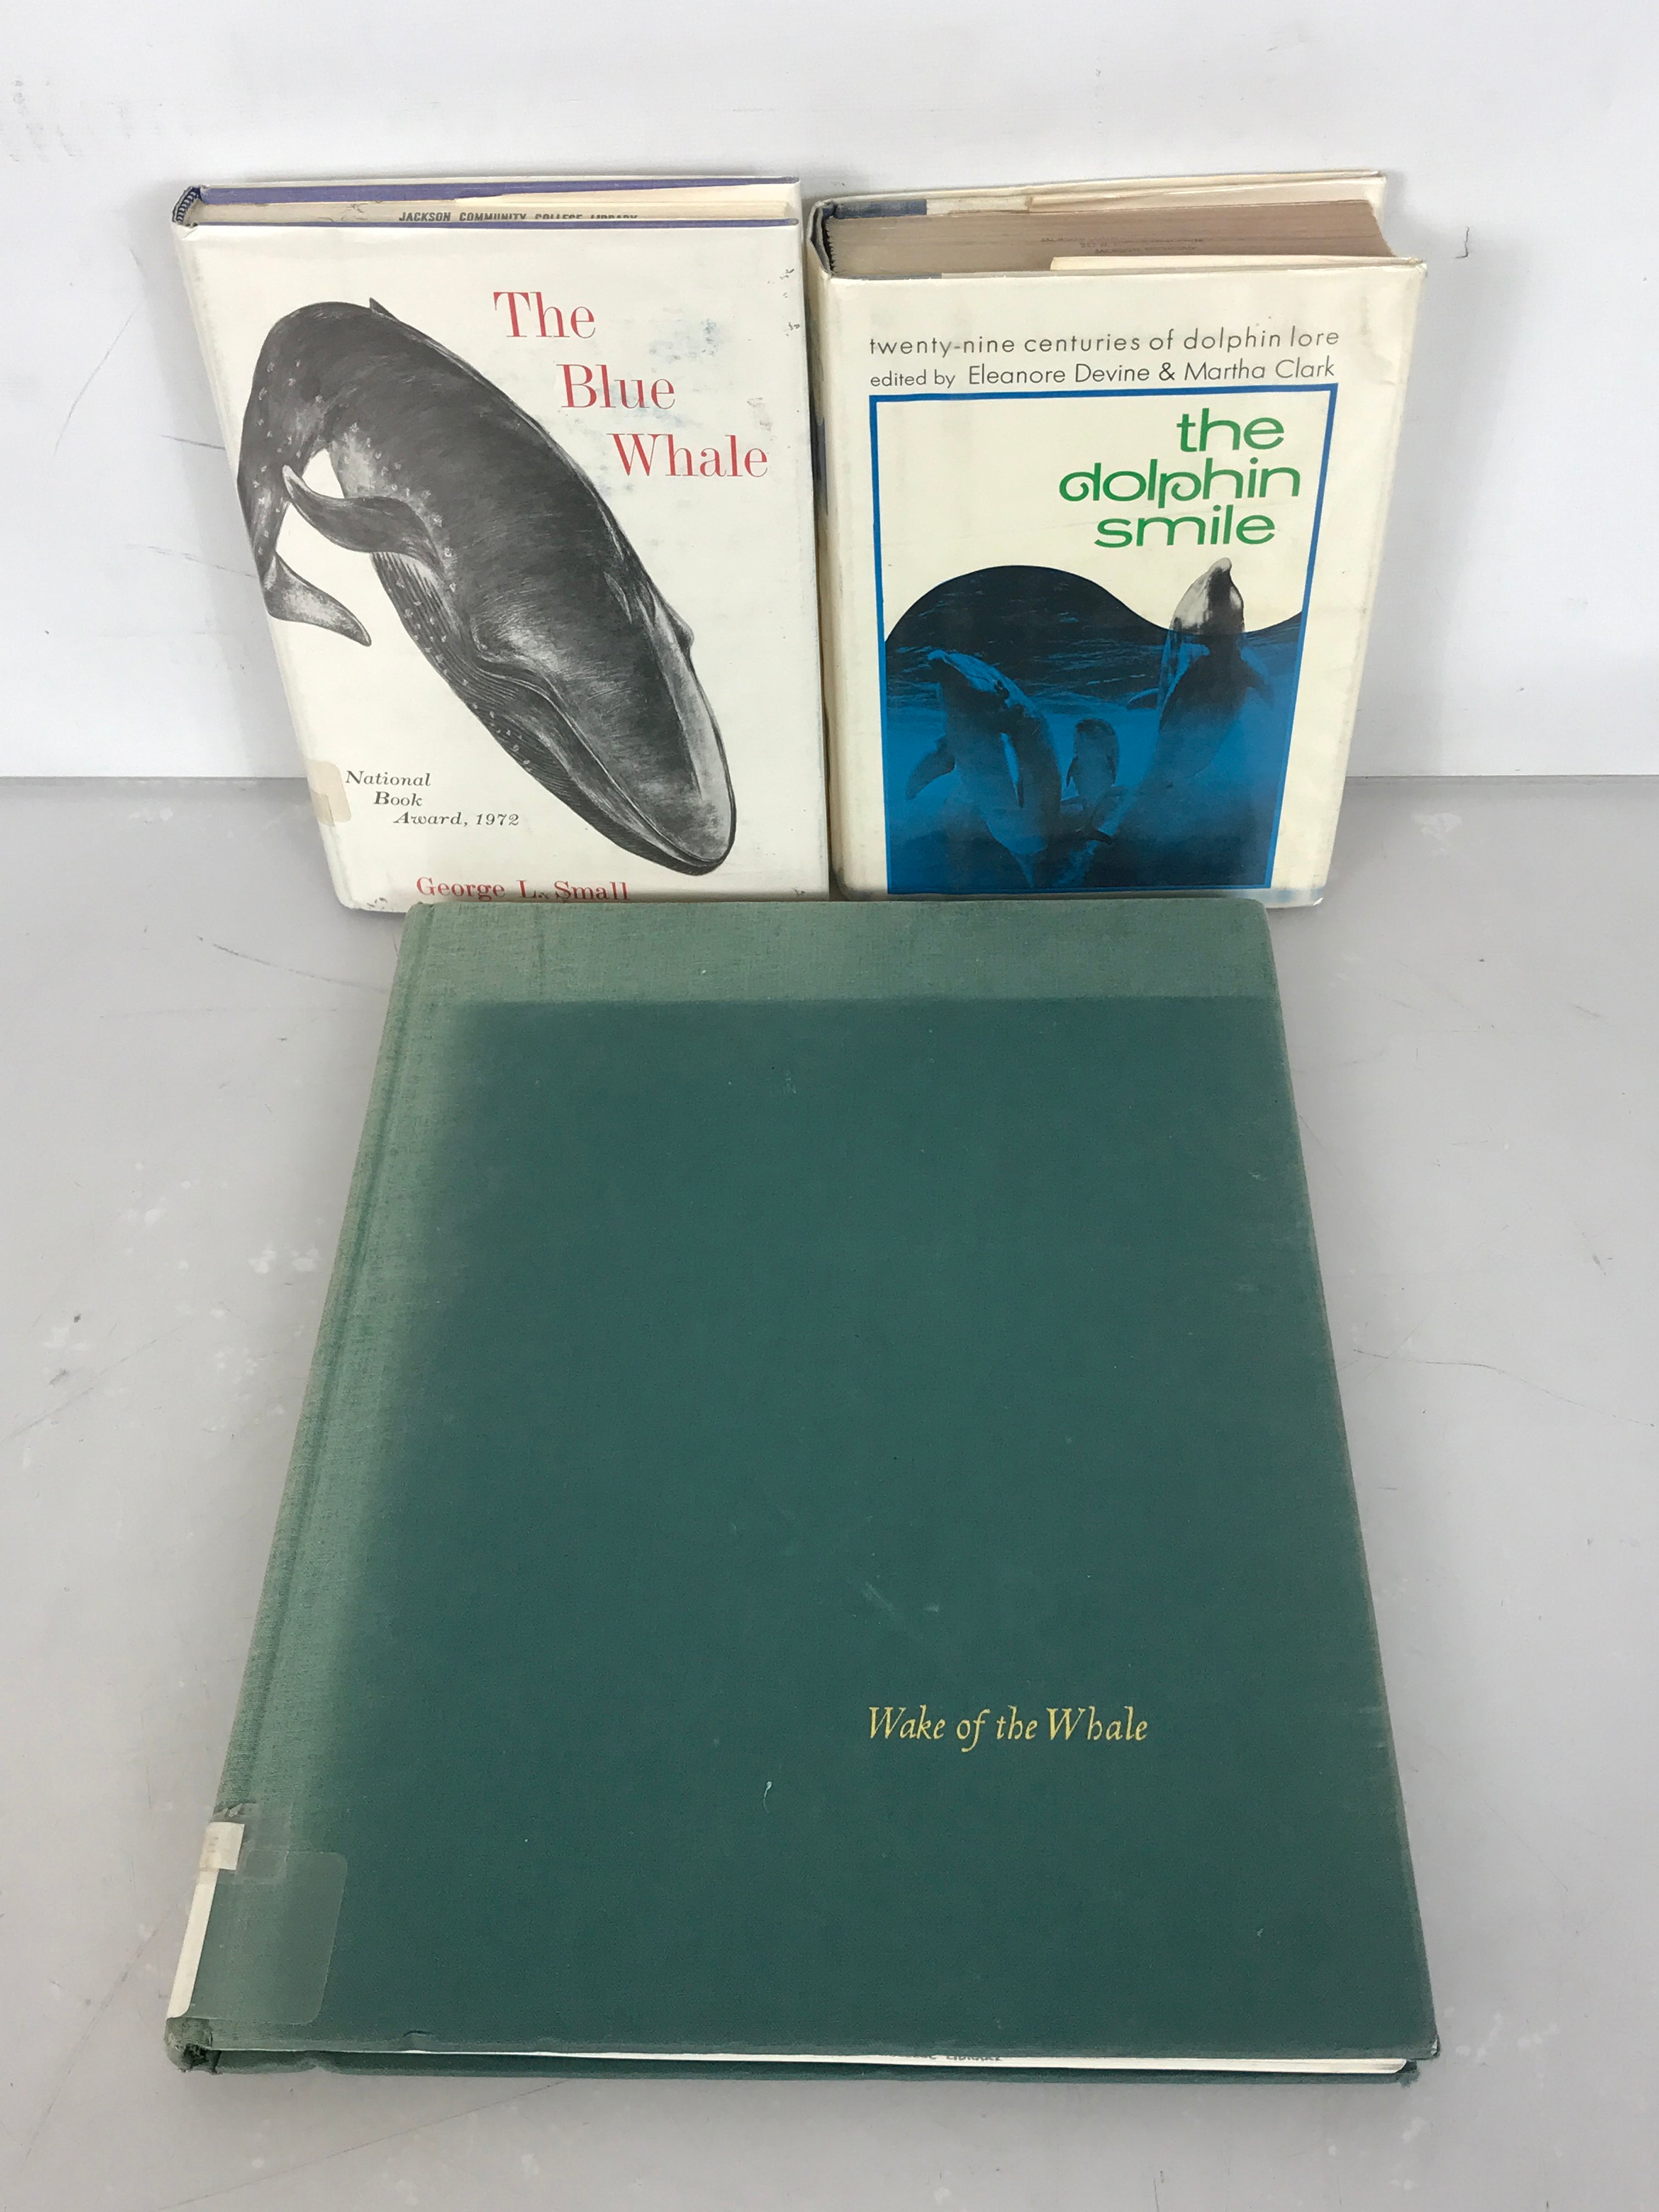 Lot of 3 Whale and Dolphin Books: Wake of the Whale, The Blue Whale (1971), and The Dolphin Smile (1967, First Printing) HC DJ